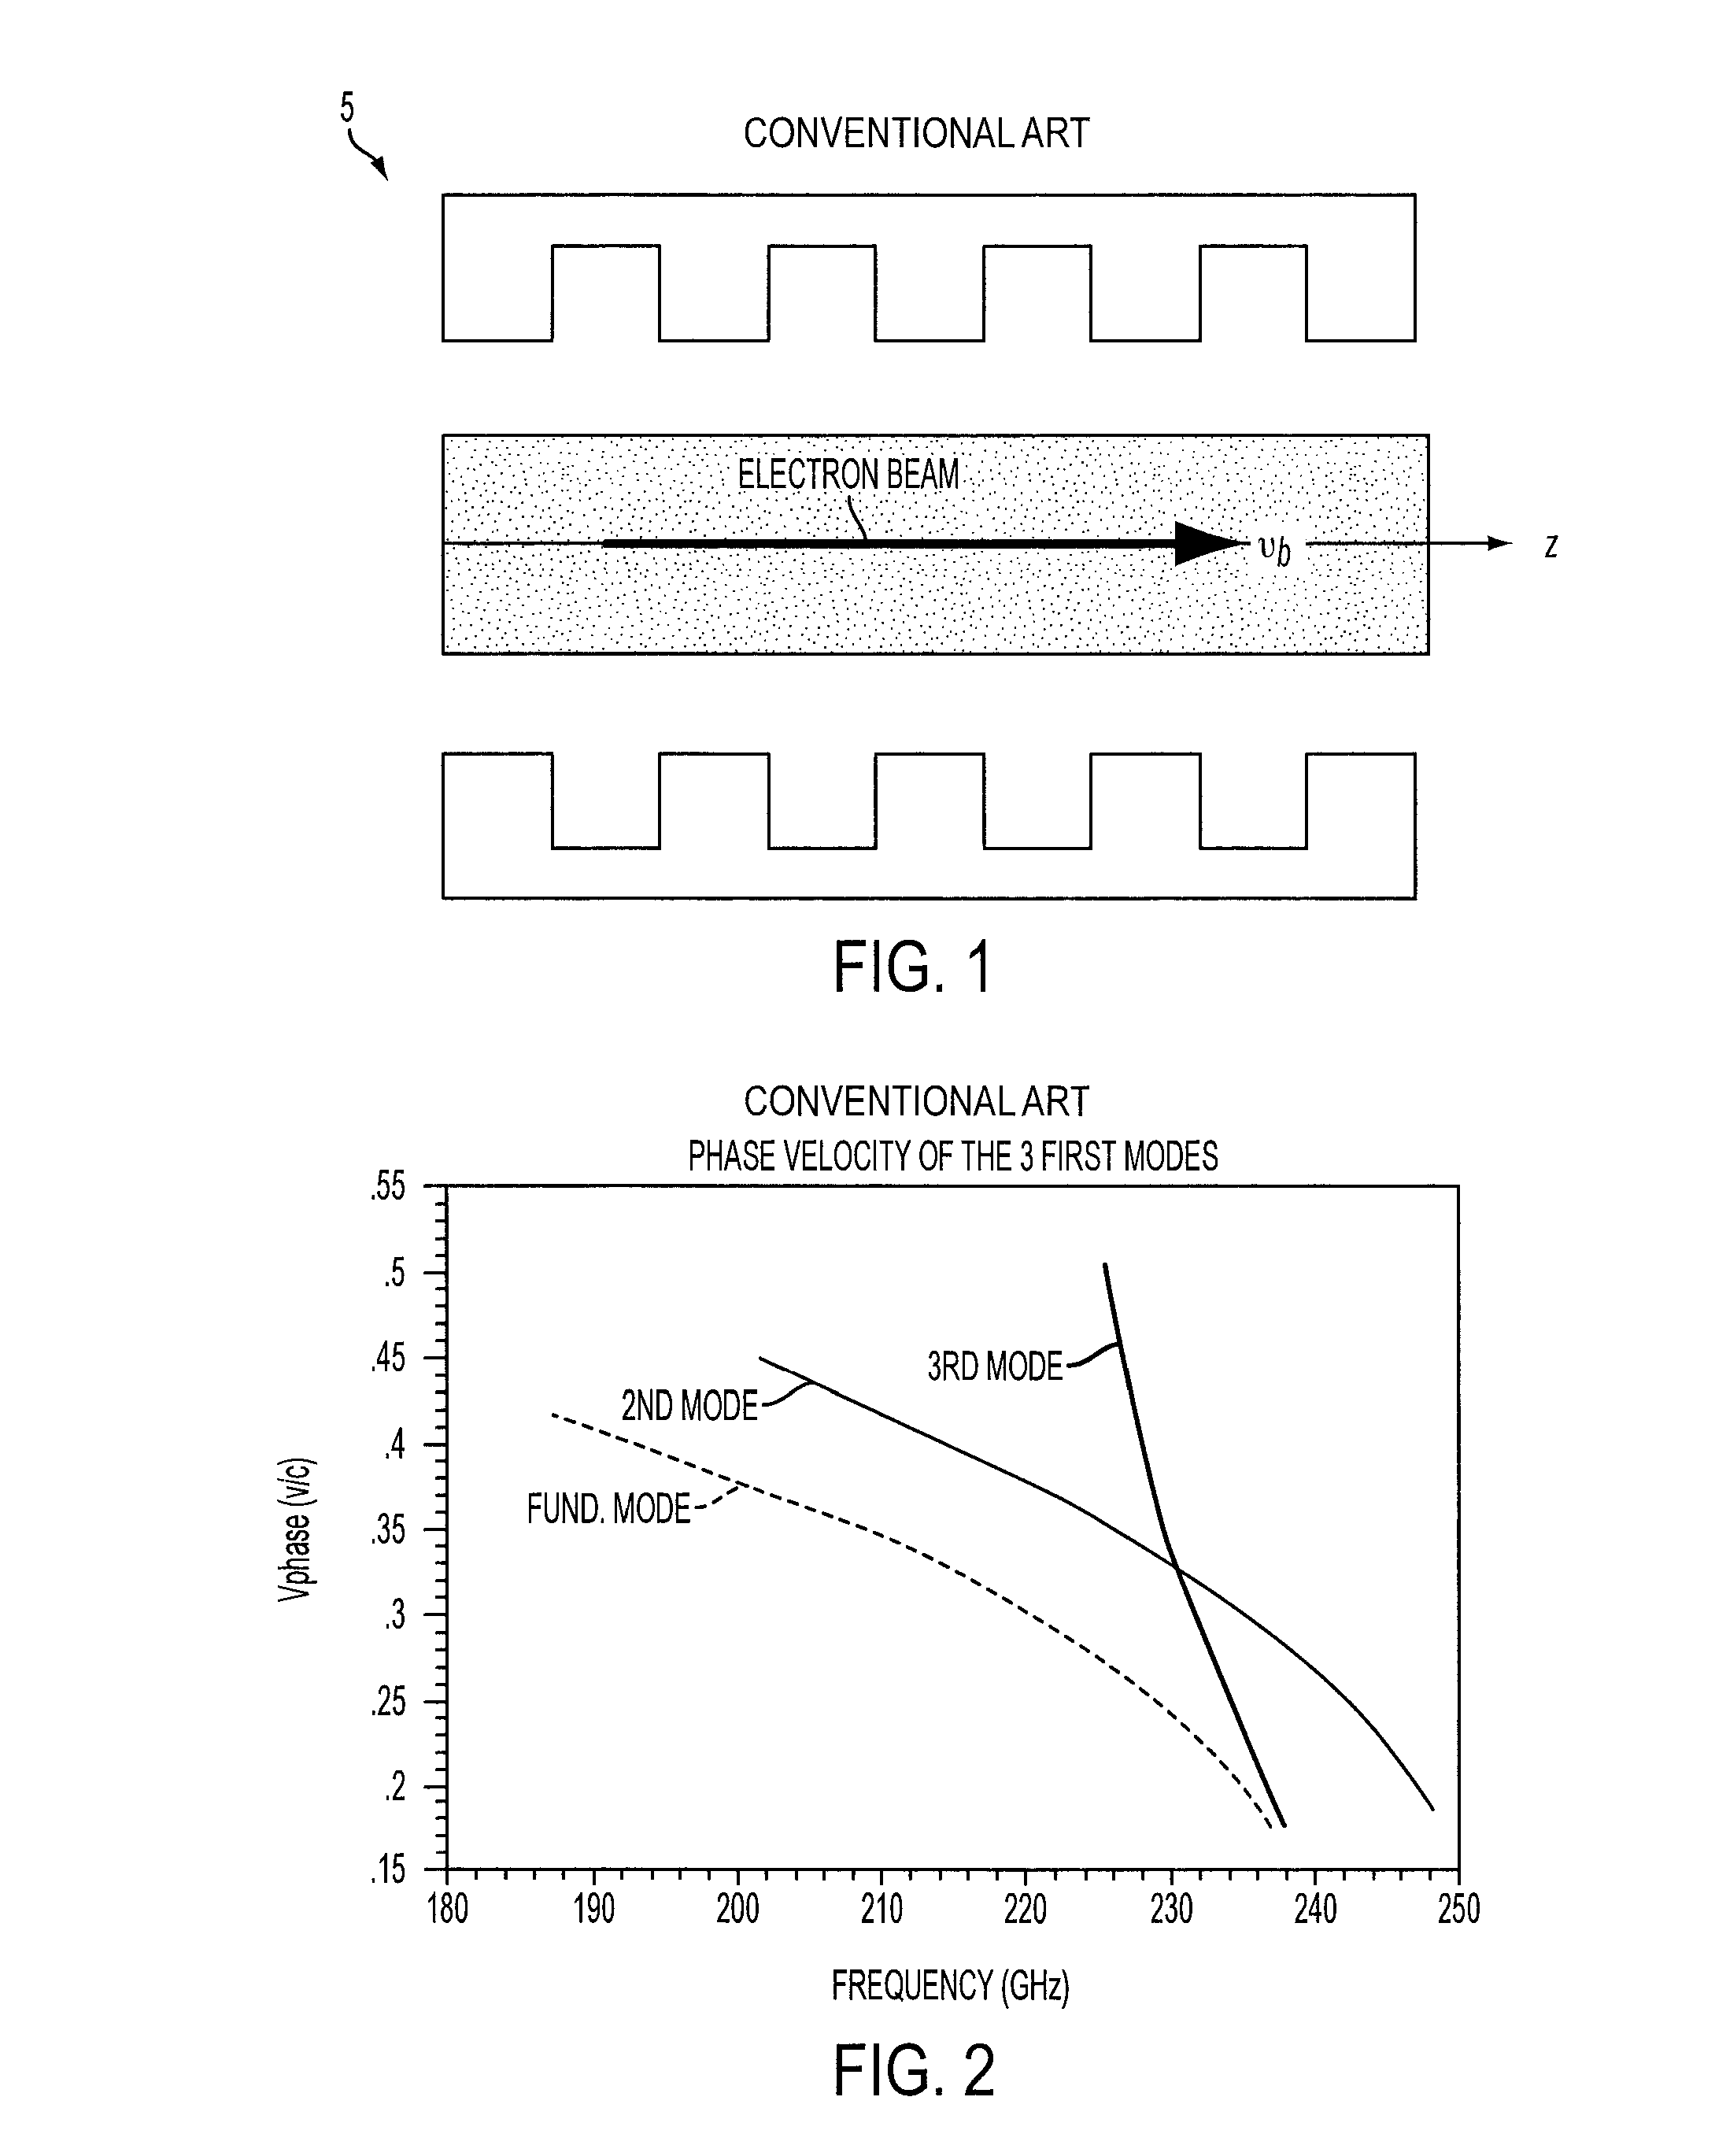 Slow wave structure having offset projections comprised of a metal-dielectric composite stack